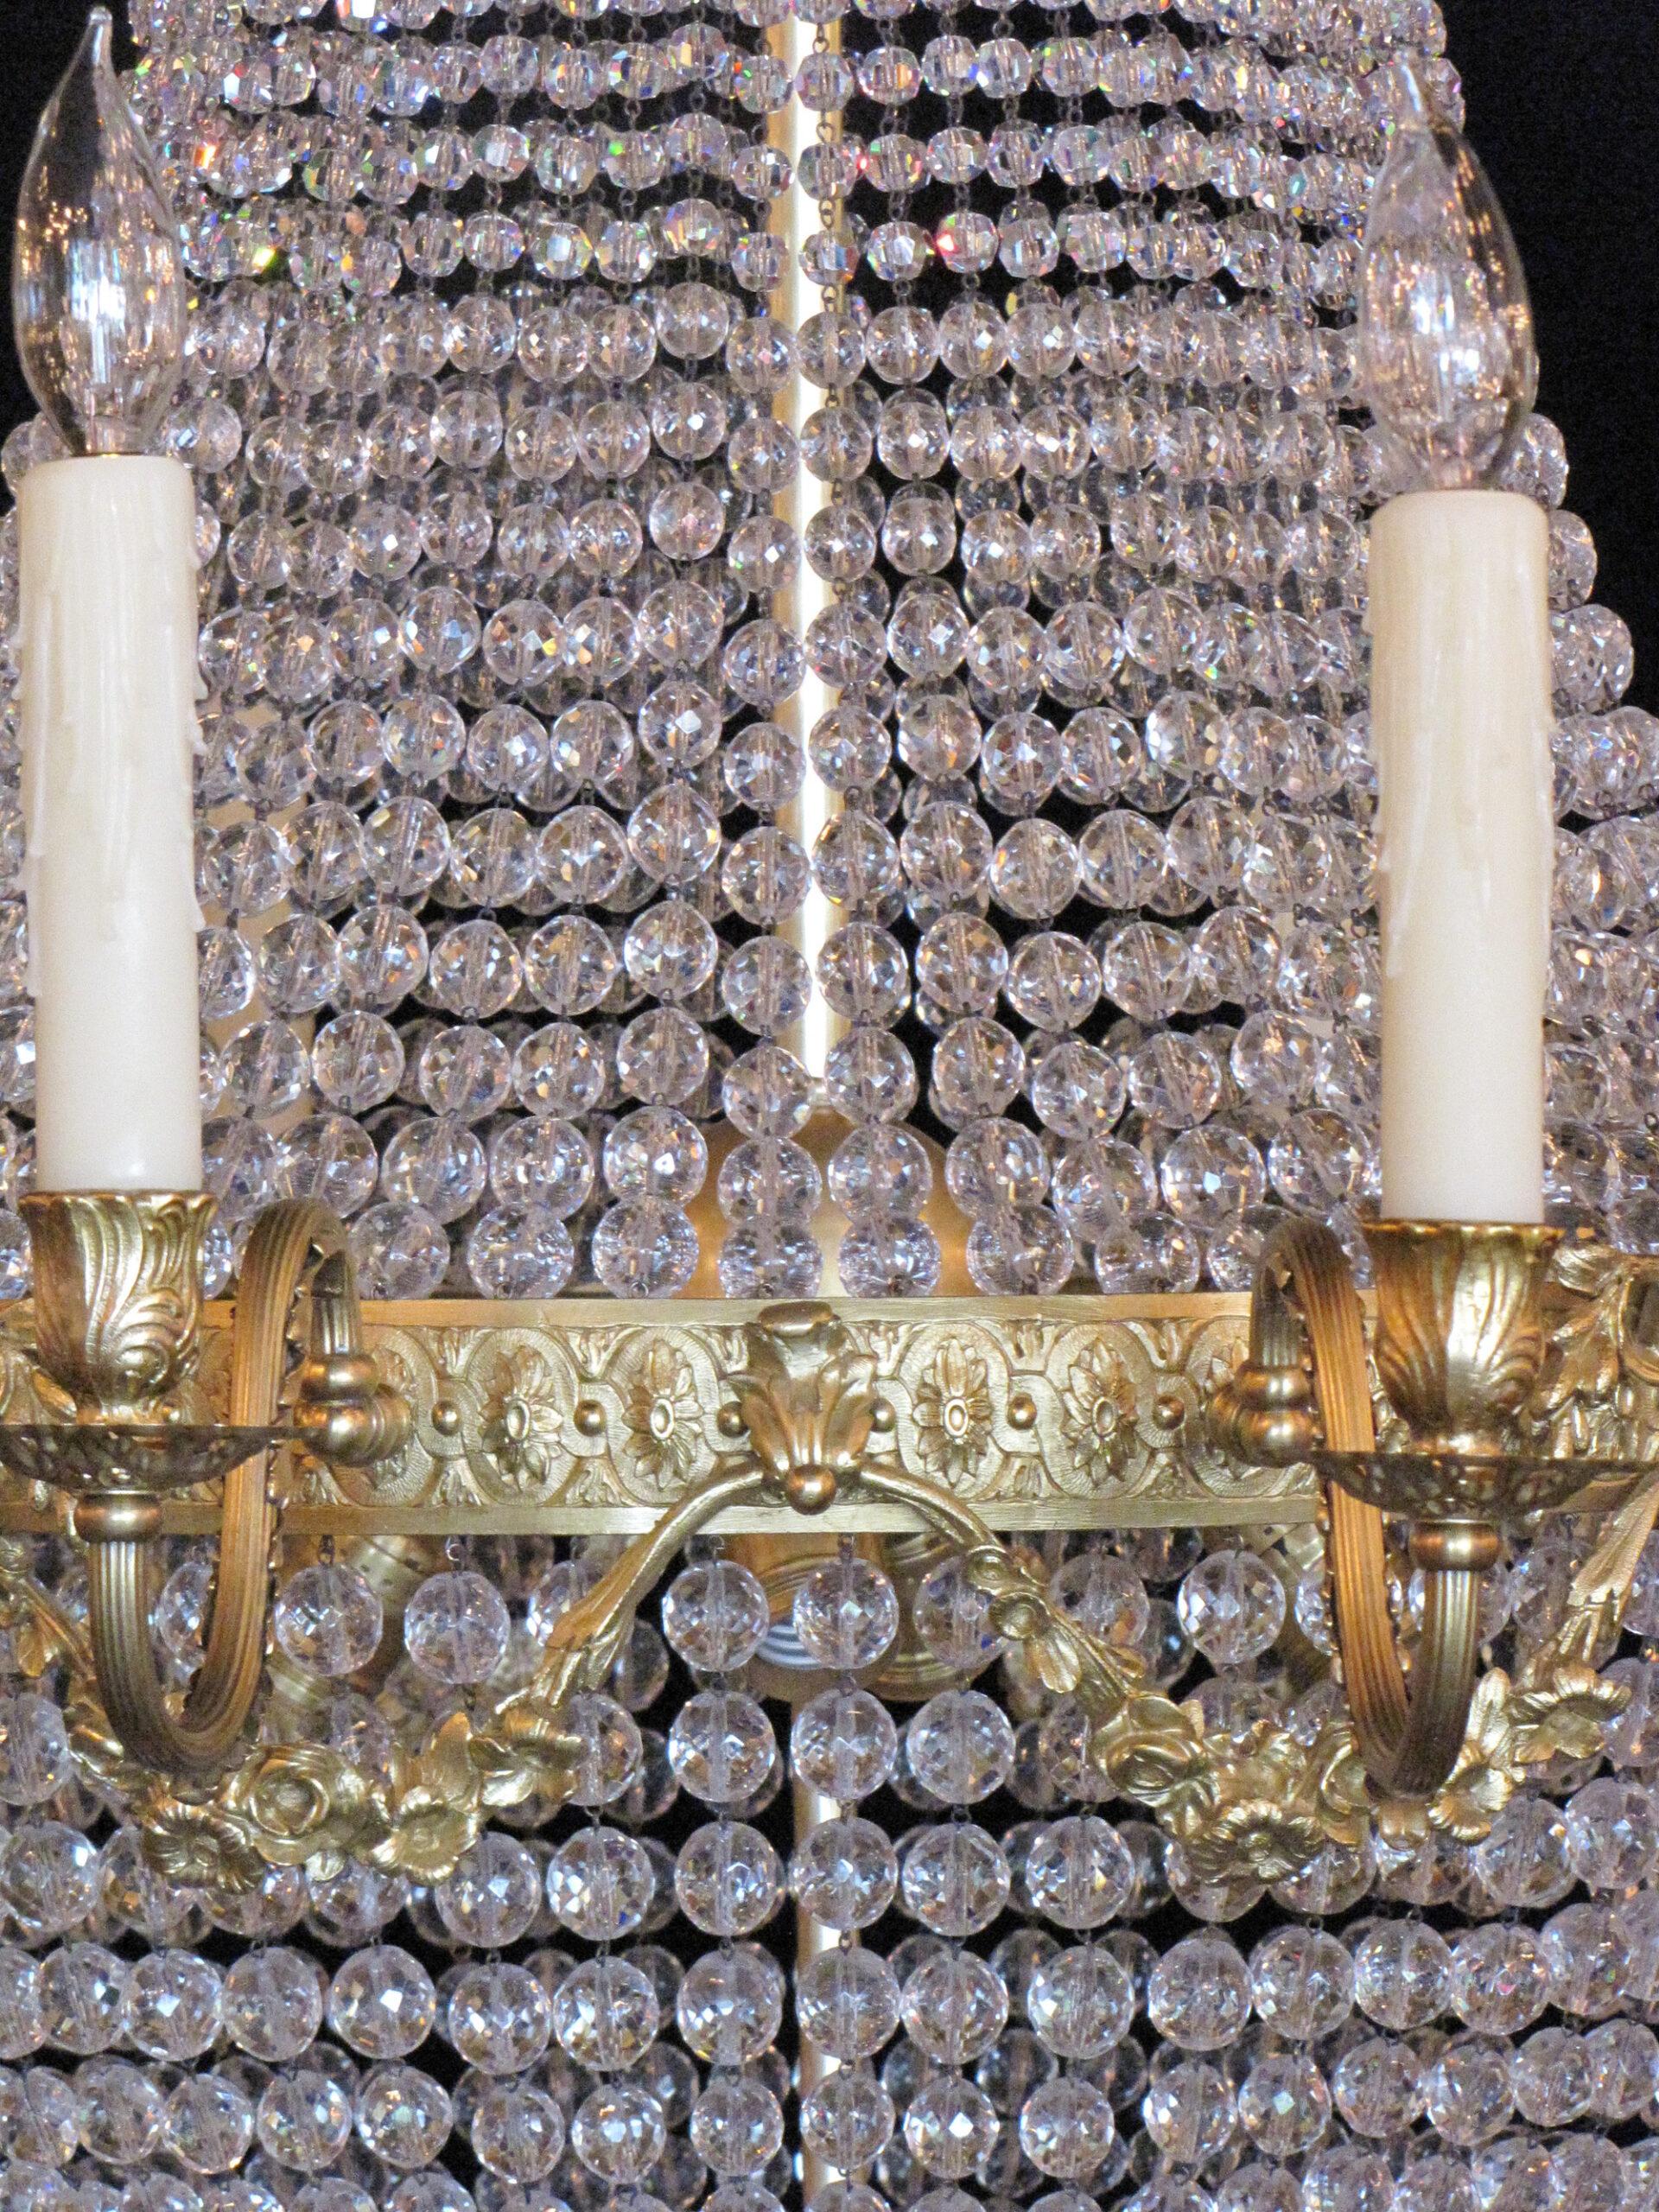 19th Century French Empire Basket Chandelier For Sale